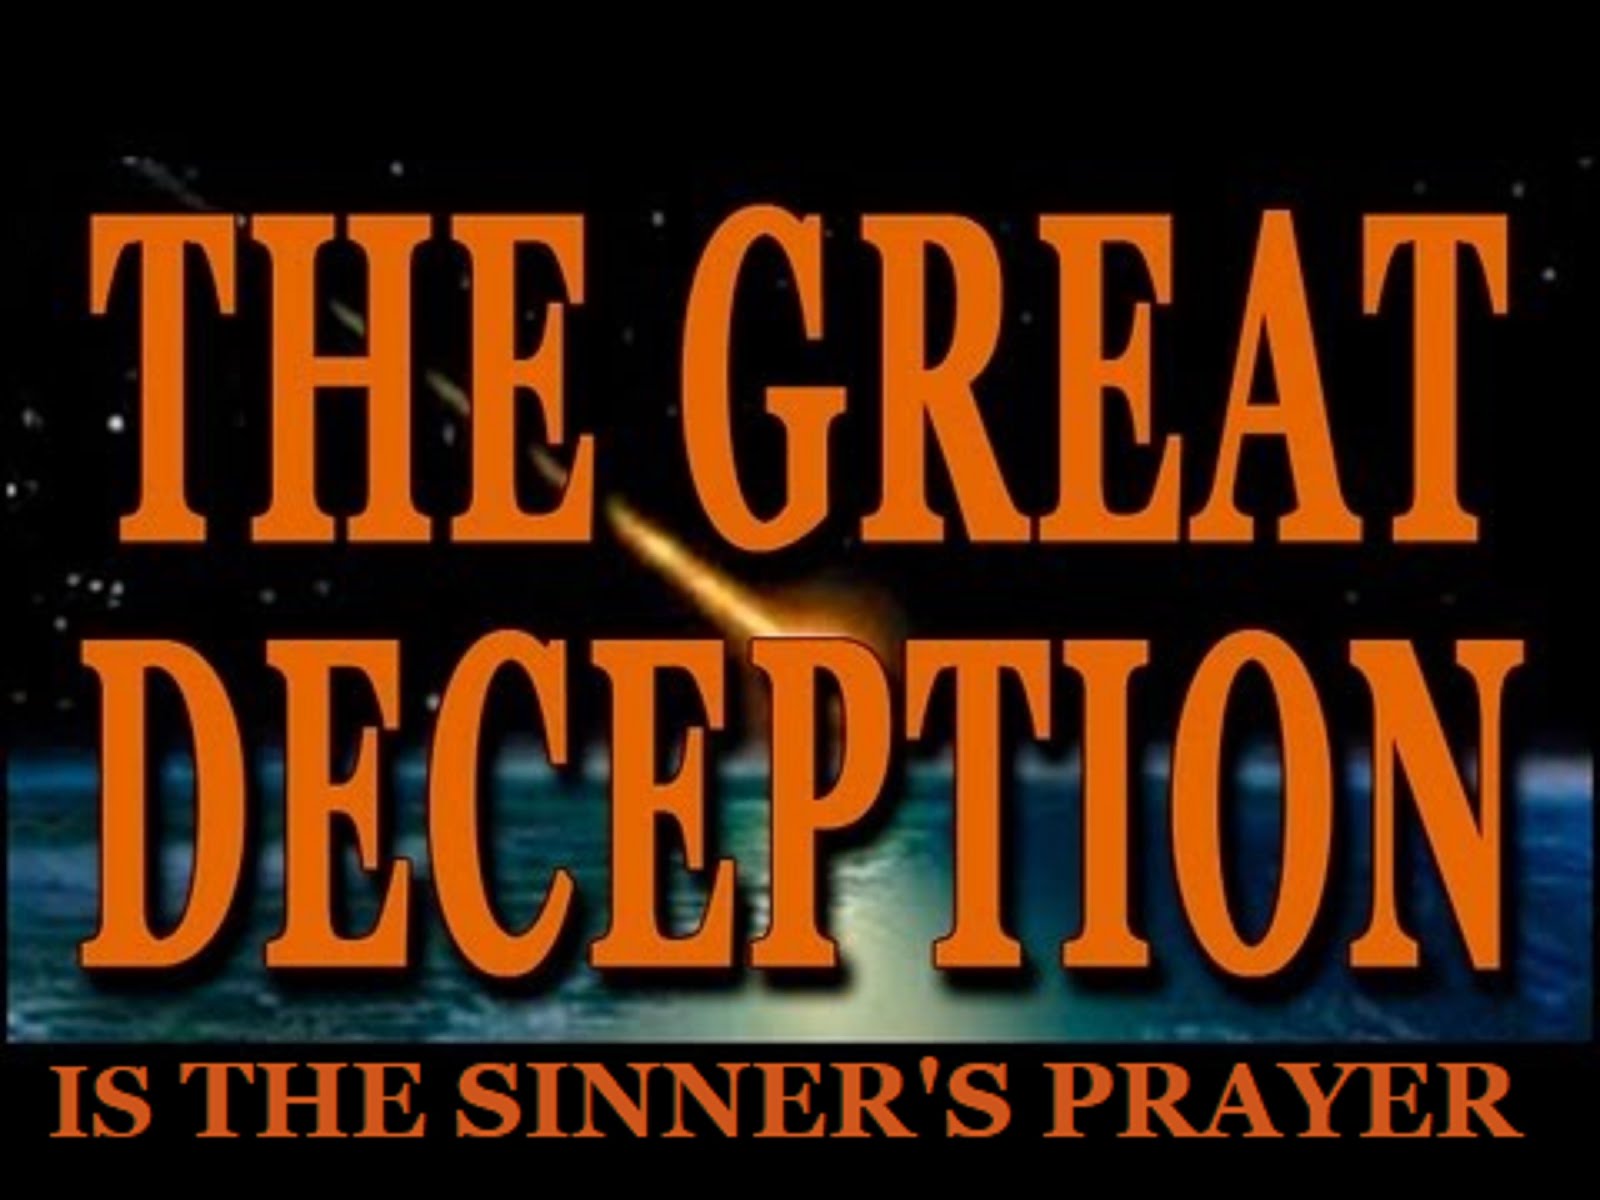 THE GREAT DECEPTION - IS THE SINNER'S PRAYER